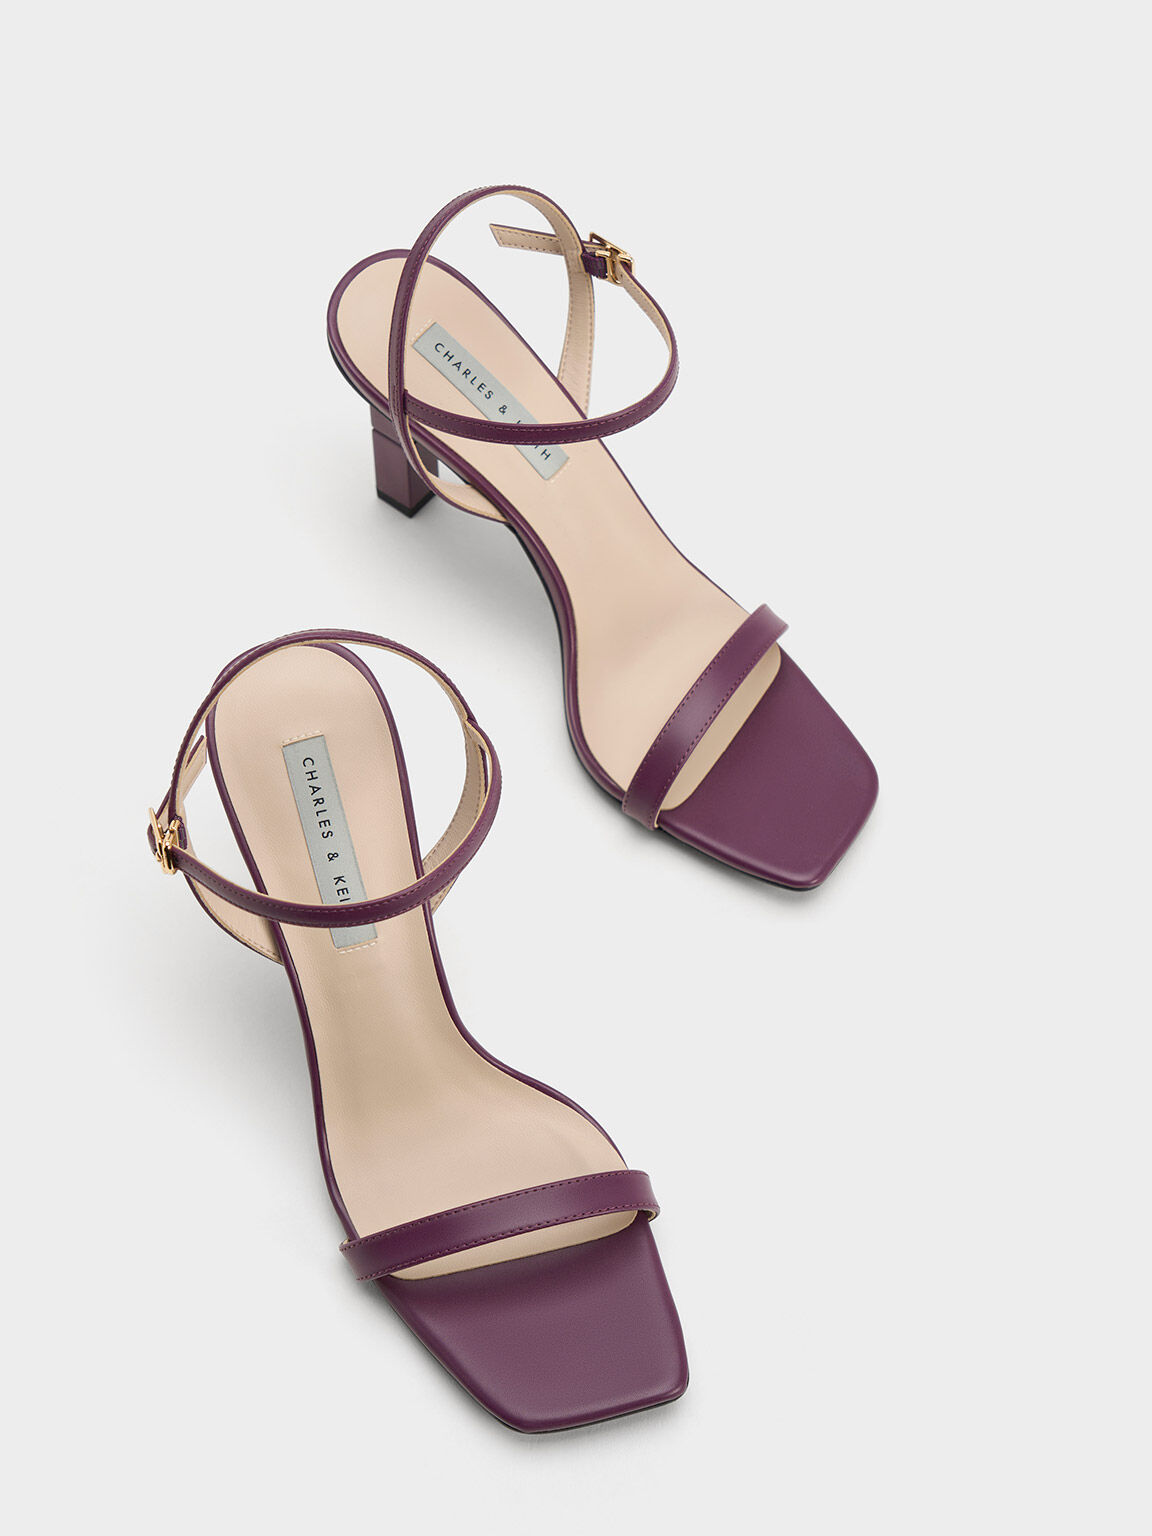 Flats & Sandals | Charles And Keith Sandle With 4 Inches Heels | Freeup